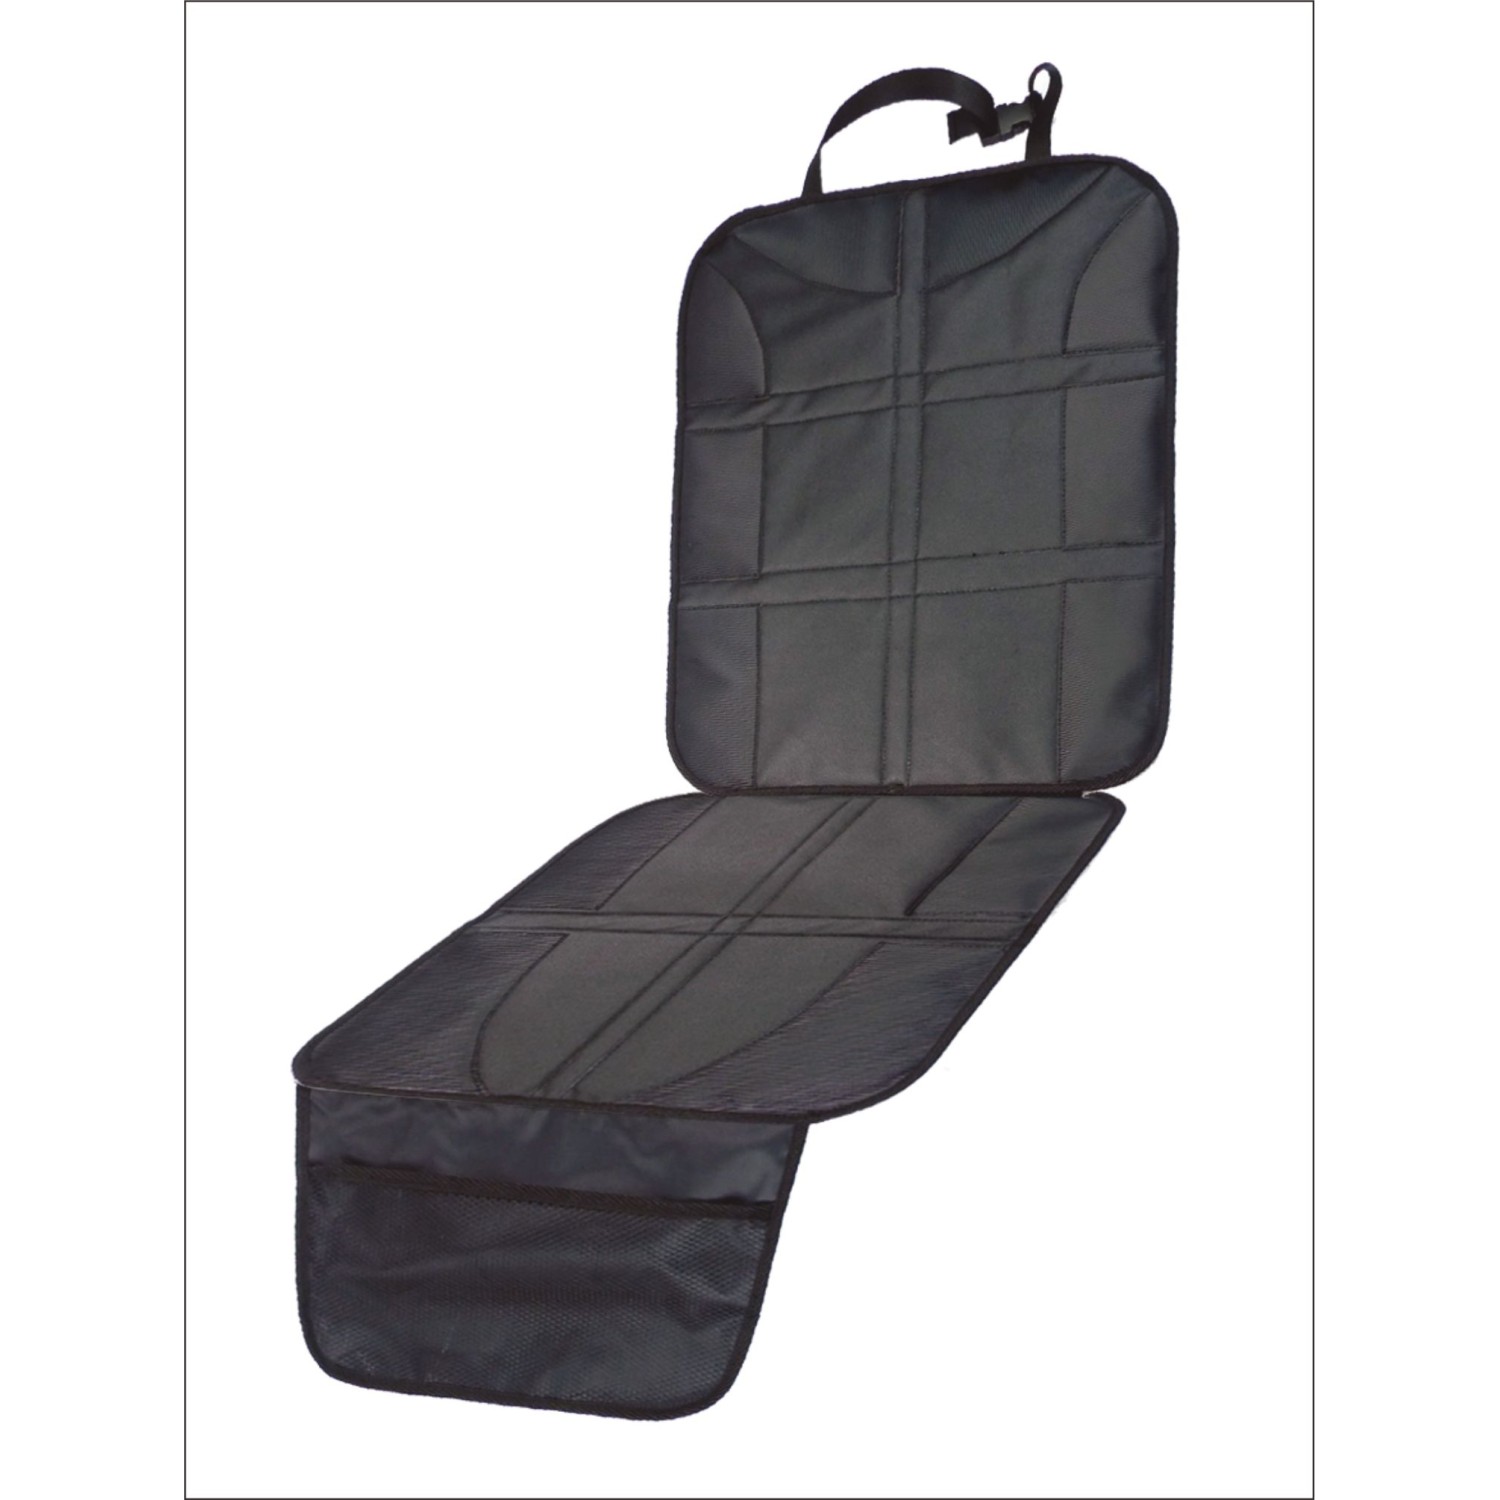 CAR BABY SEAT PADDED PROTECTOR